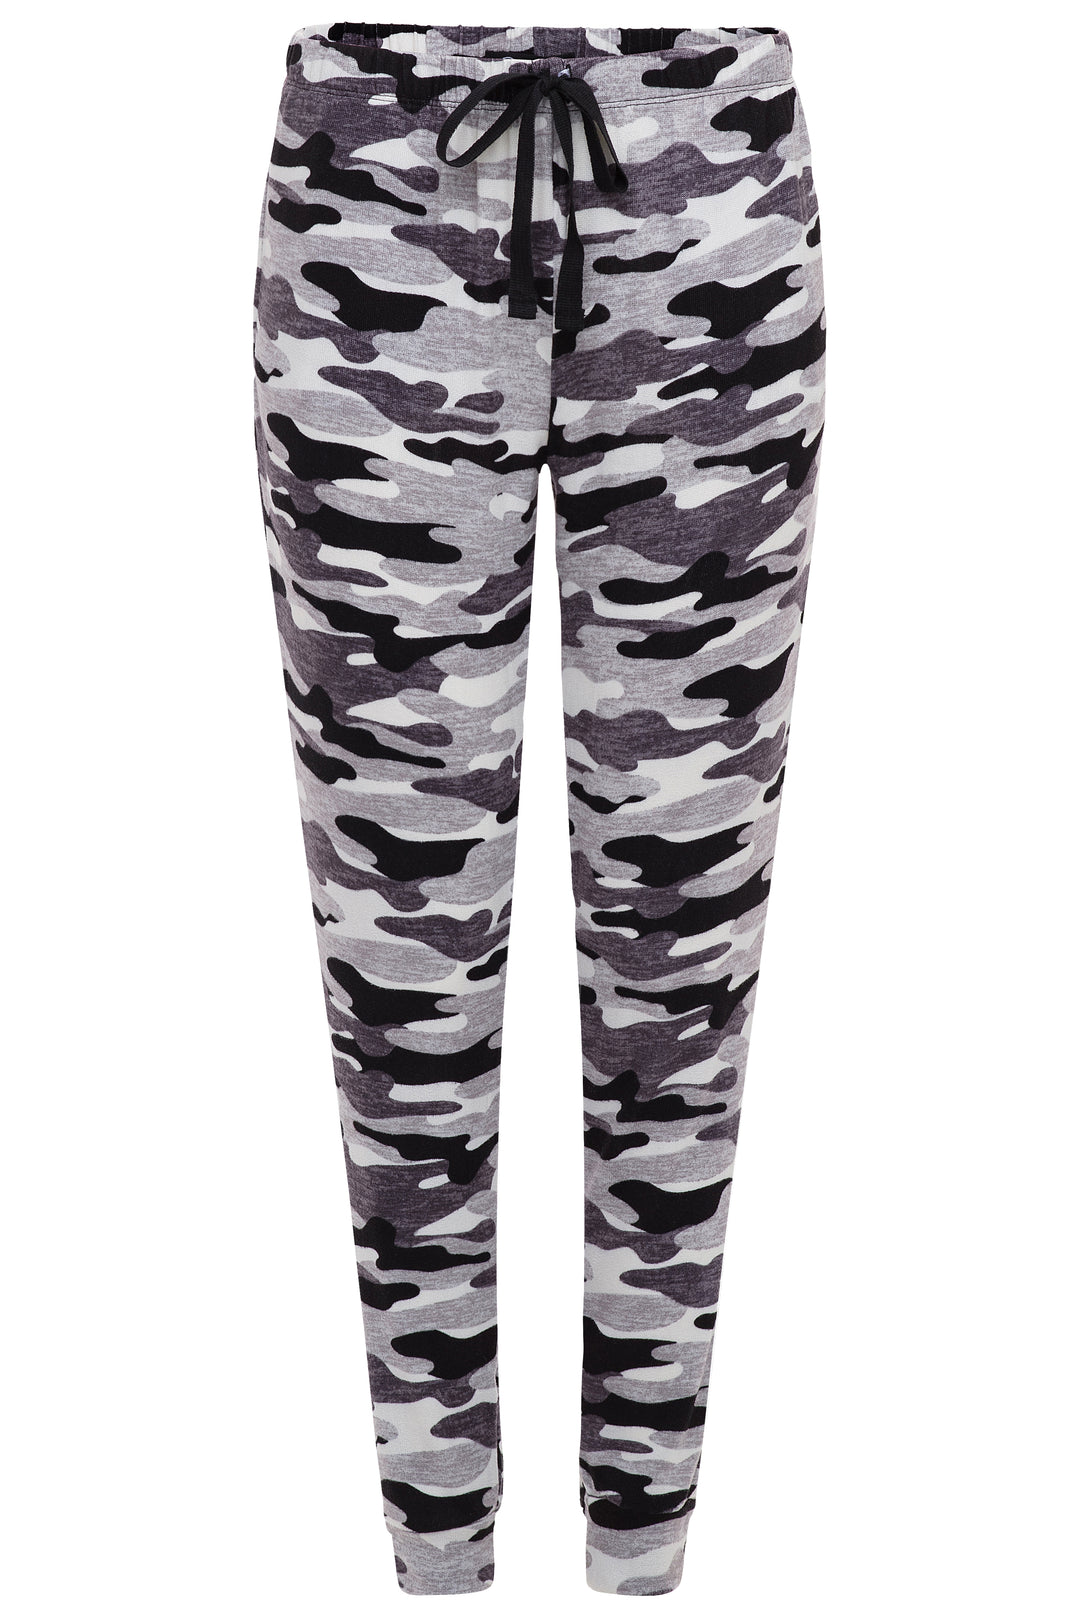 Black camo patterned pants as part of the 2 Pack René Rofé Lightweight Hacci Jogger Pajama Pants in Black and Pink Camo pattern